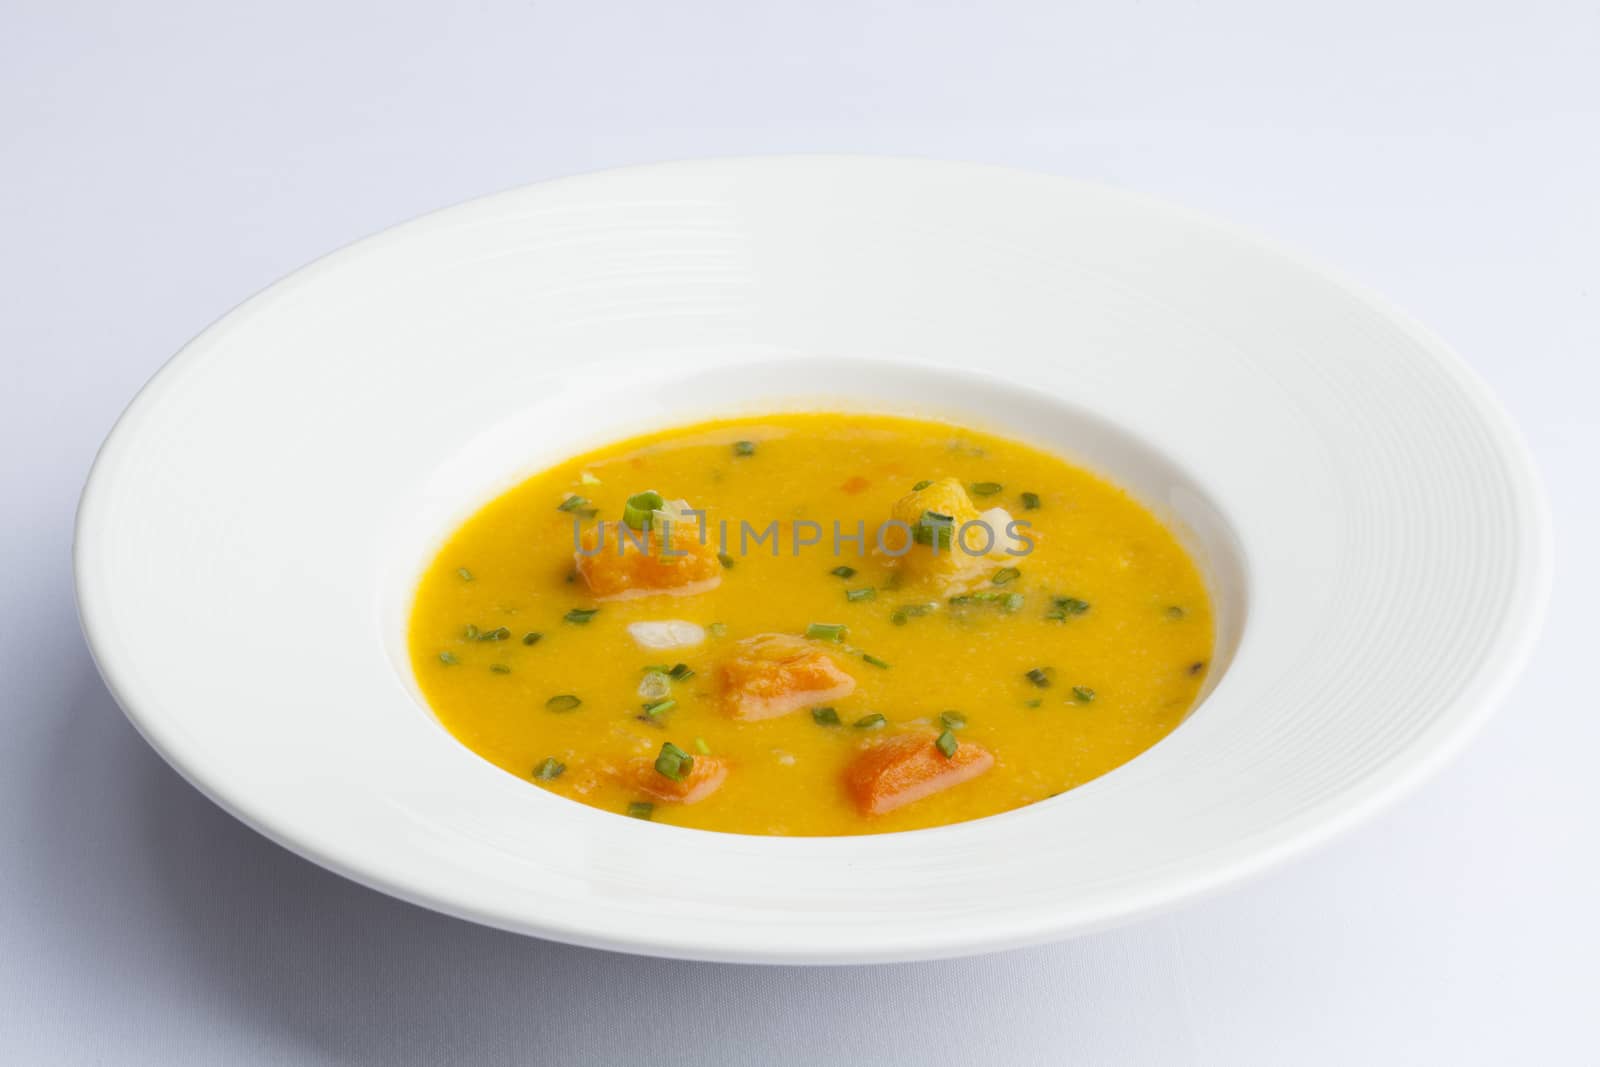 Pumpkin soup with cream and pumpkin seeds on white background.